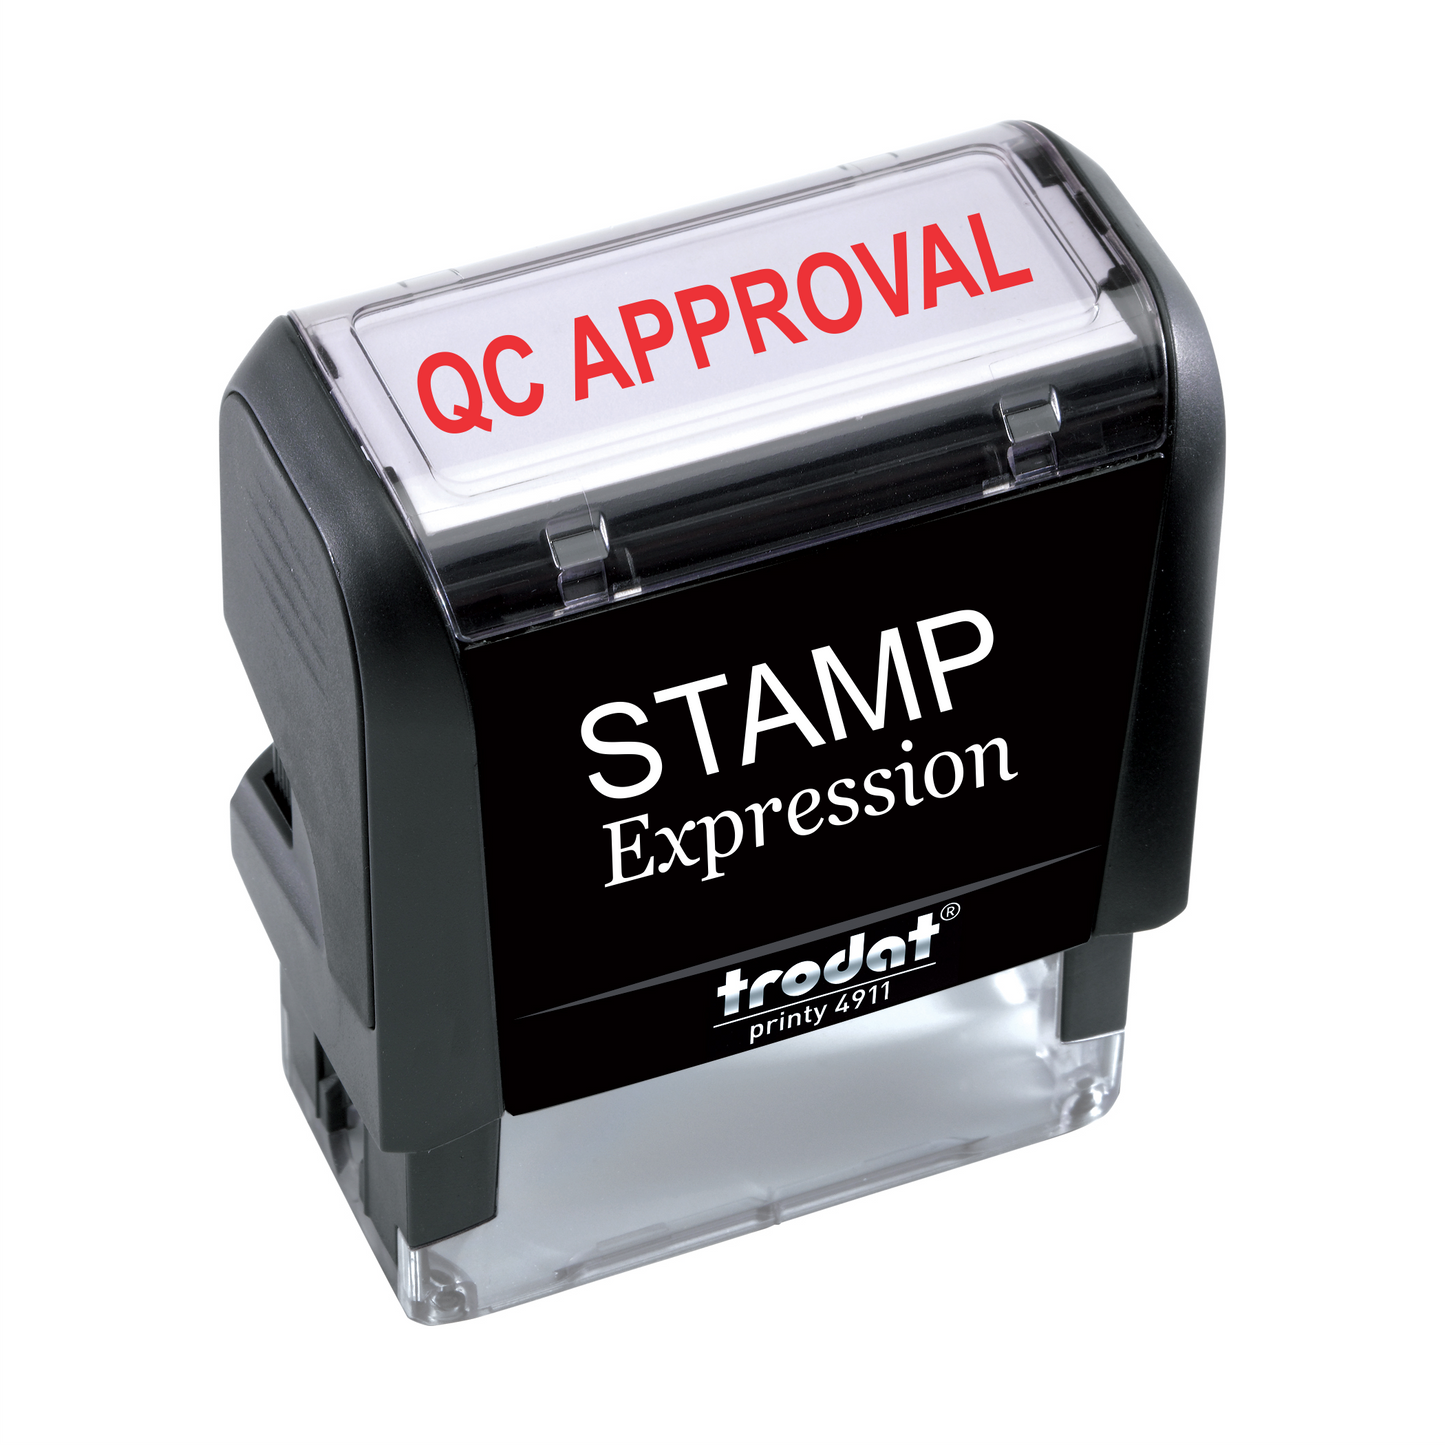 QC Approval Office Self Inking Rubber Stamp (SH-5852)